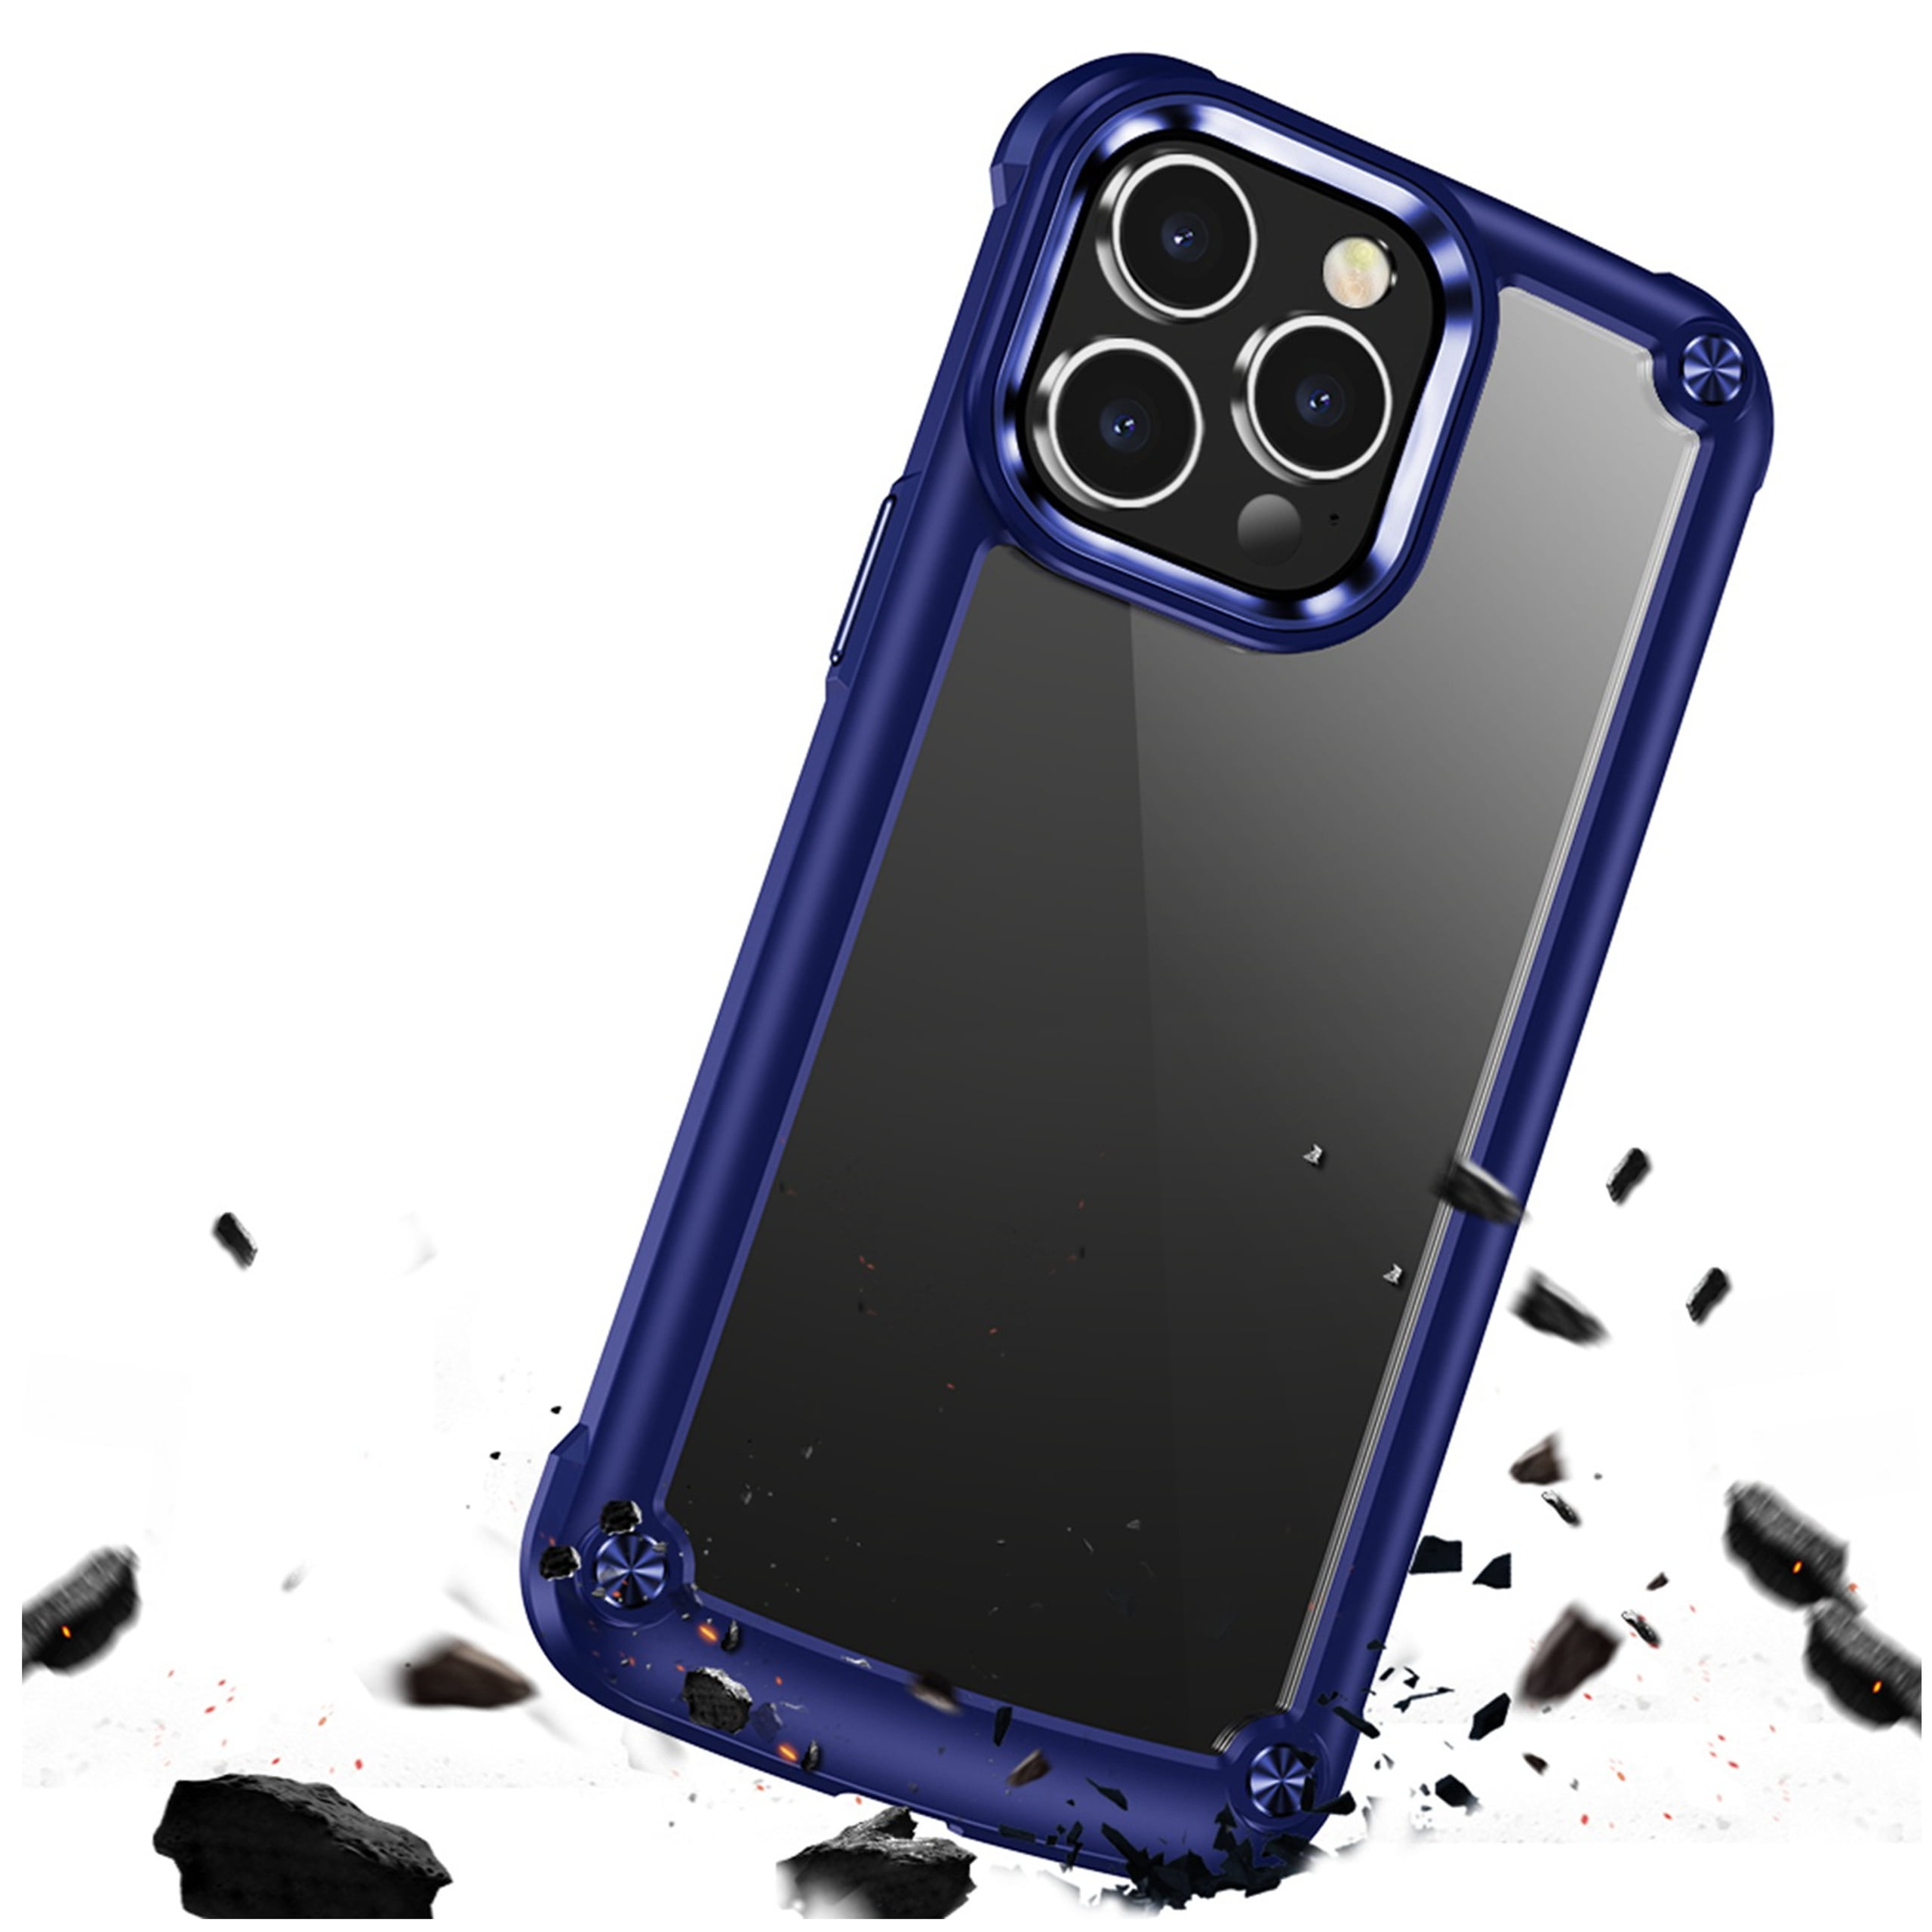  YBROY Case for Xiaomi 12S Ultra, Soft TPU + Hard PC, Full Body  Rugged Shockproof Case, Stand Function, Anti-Scratch Cover for Xiaomi 12S  Ultra.(Blue) : Everything Else